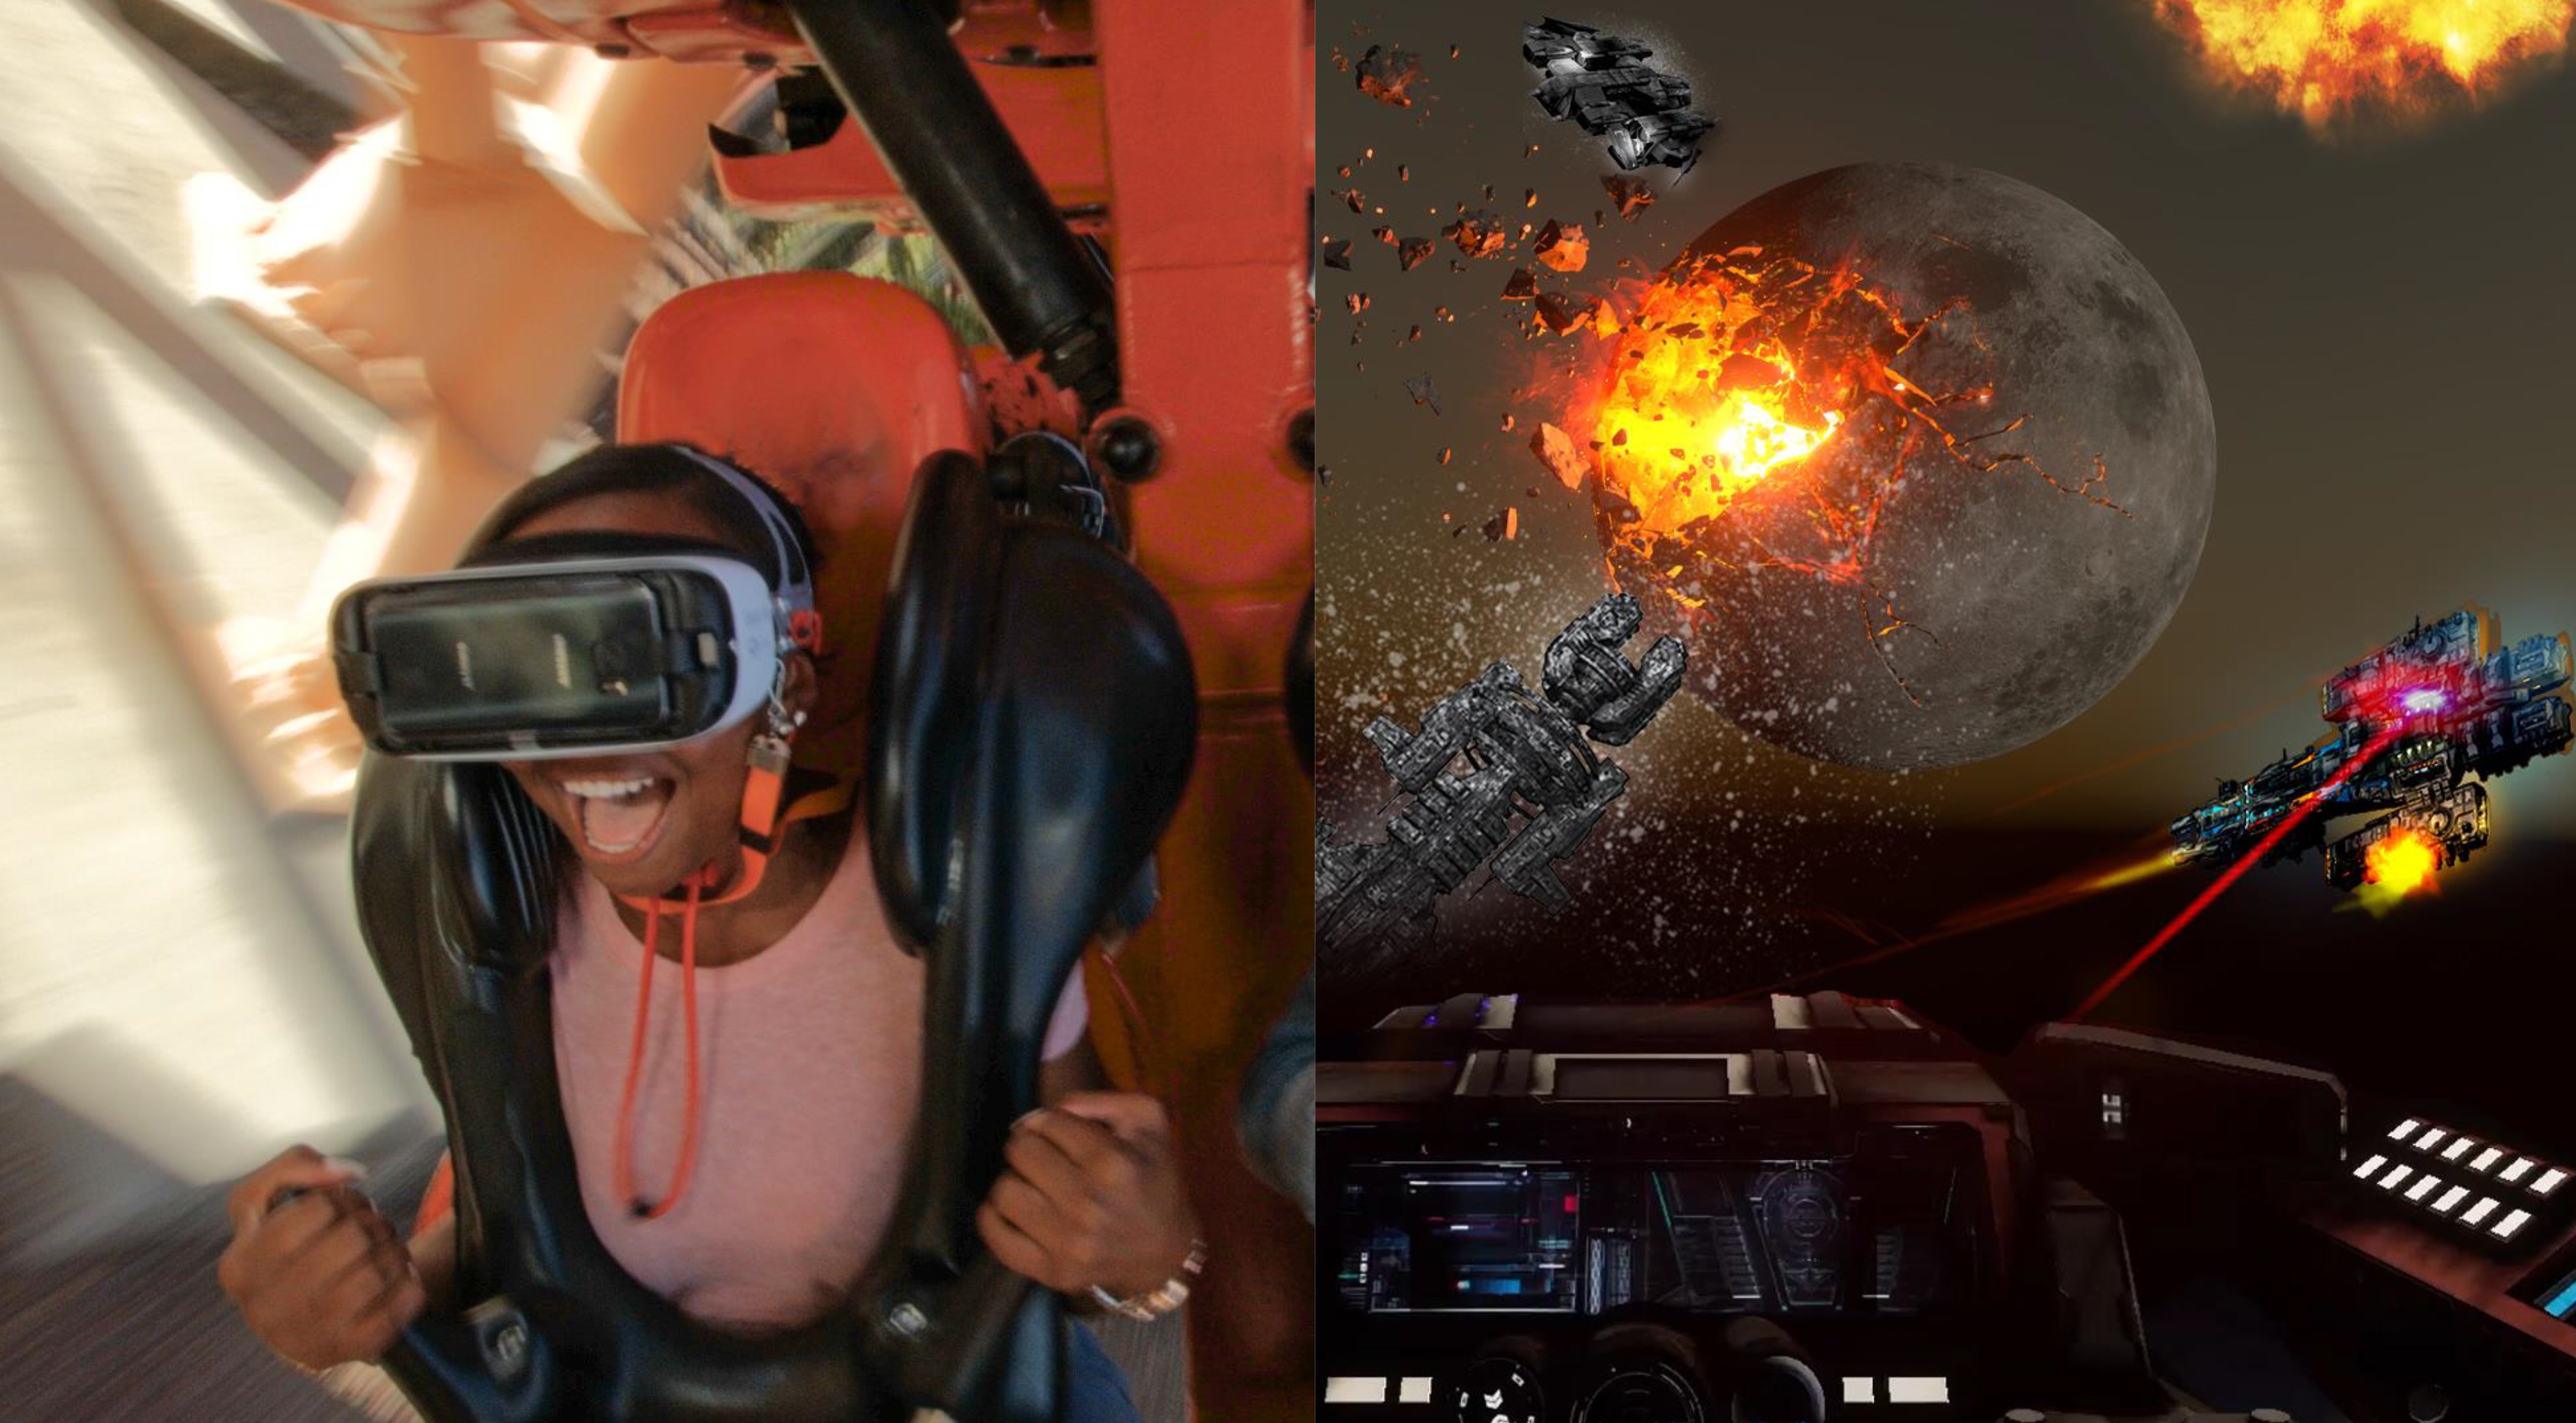 Six Flags Discovery Kingdom Adds Immersive Virtual Reality To Looping Coaster…and Blows Our Minds